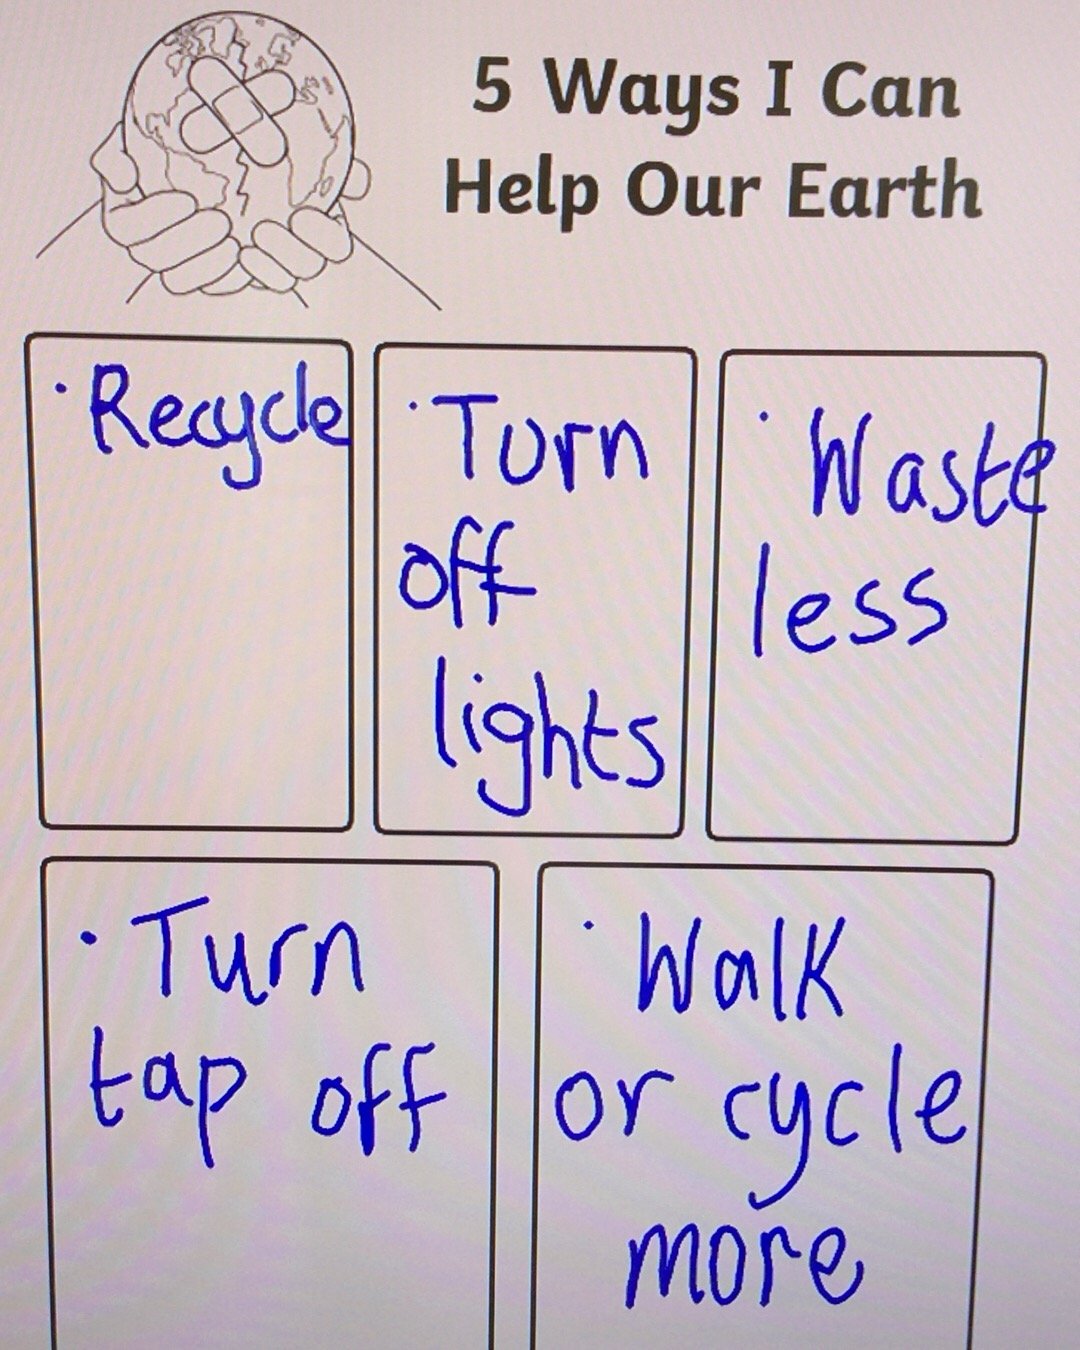 PSHE - Ways We Can Look After The Environment!